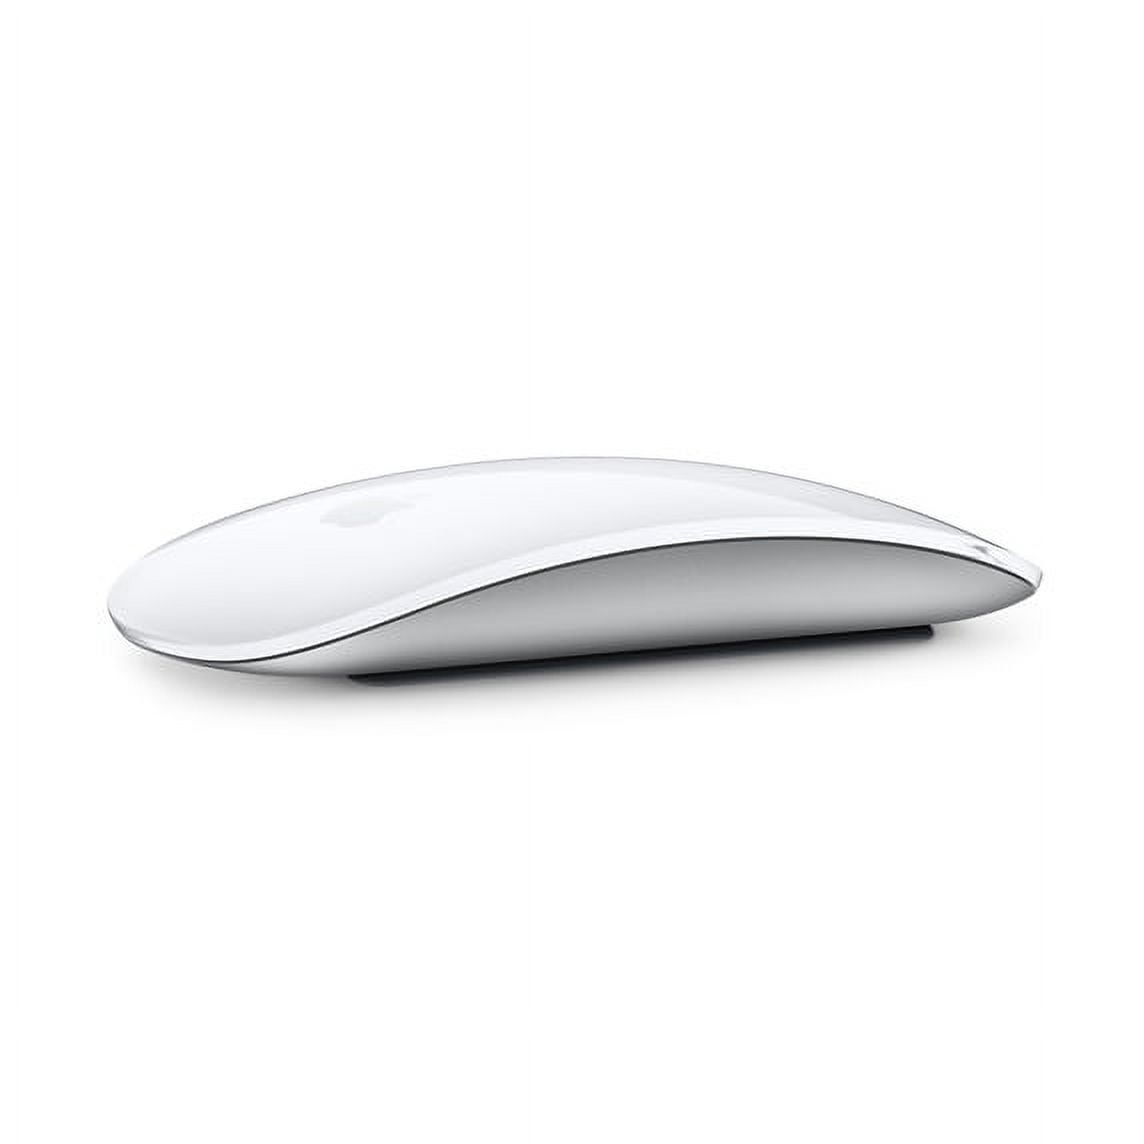 Apple Magic Mouse Wireless Bluetooth Rechargeable - Walmart.com